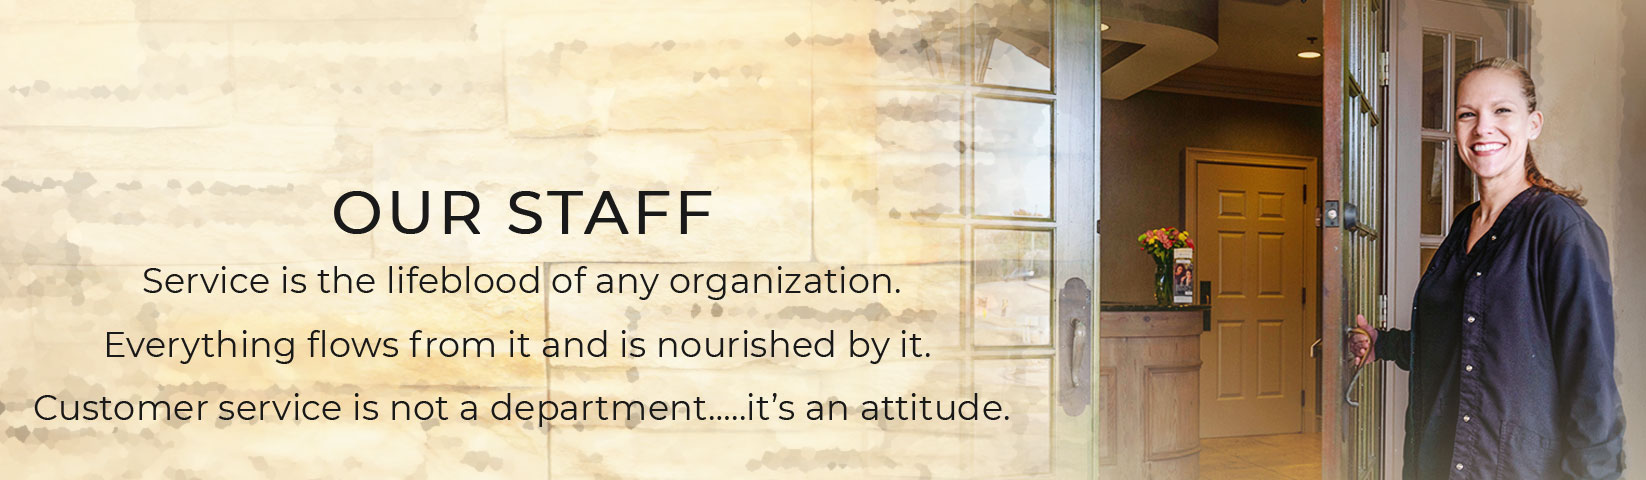 Our staff: Service is the lifeblood of any organization